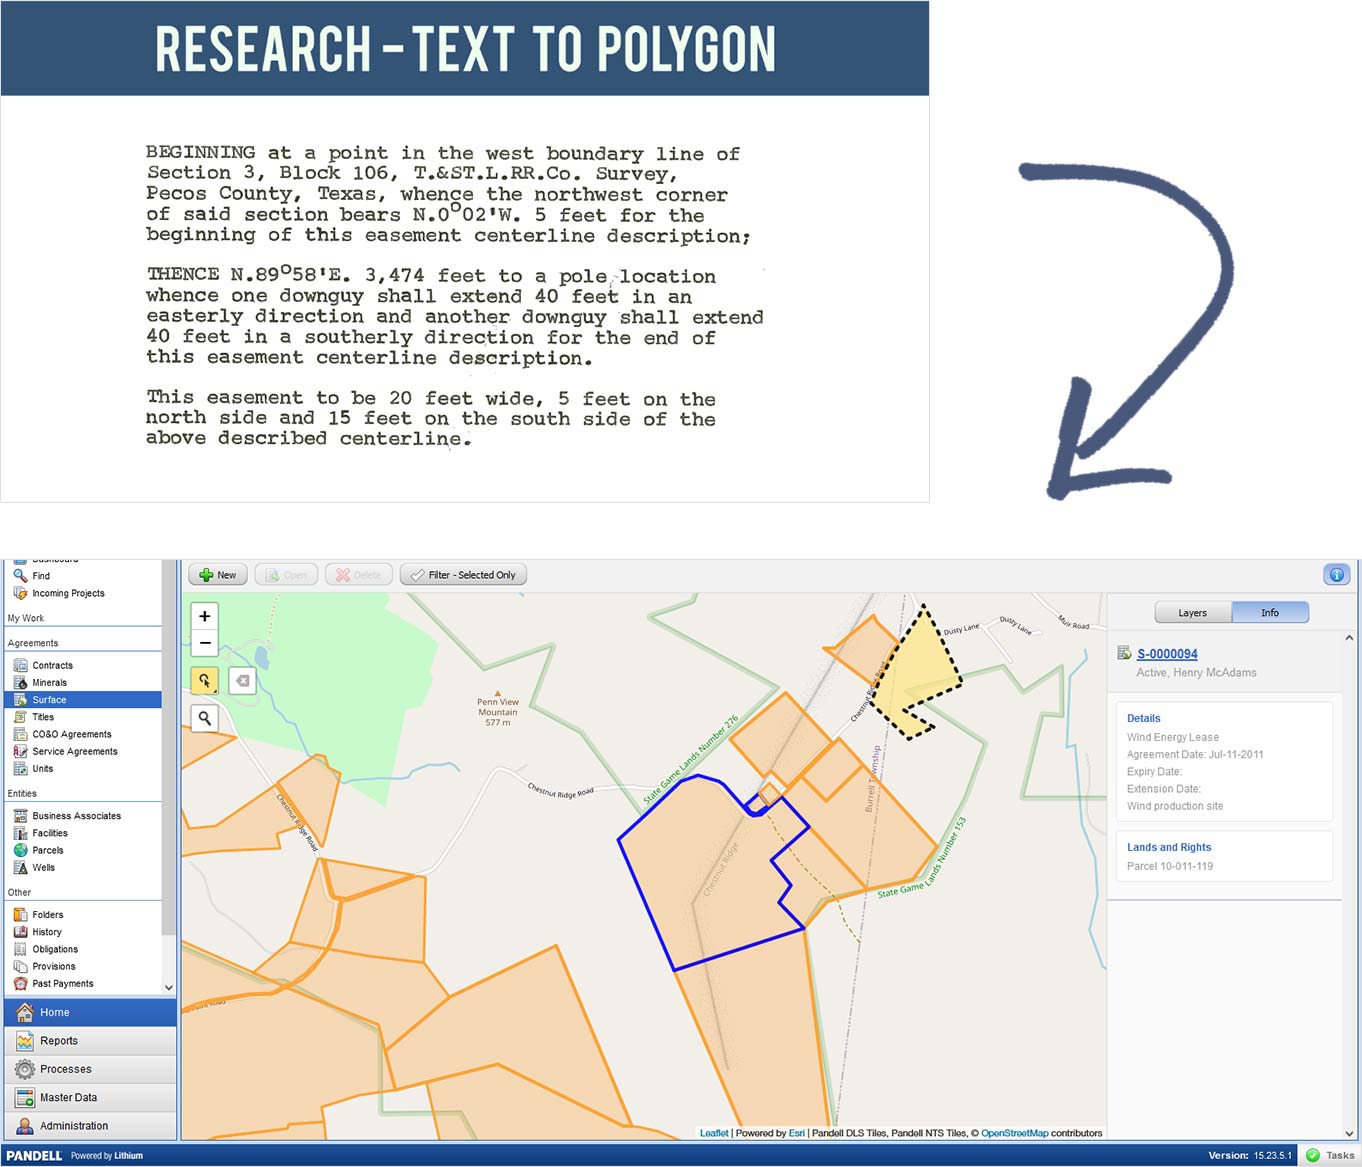 Automatic generation of GIS polygons from text descriptions.